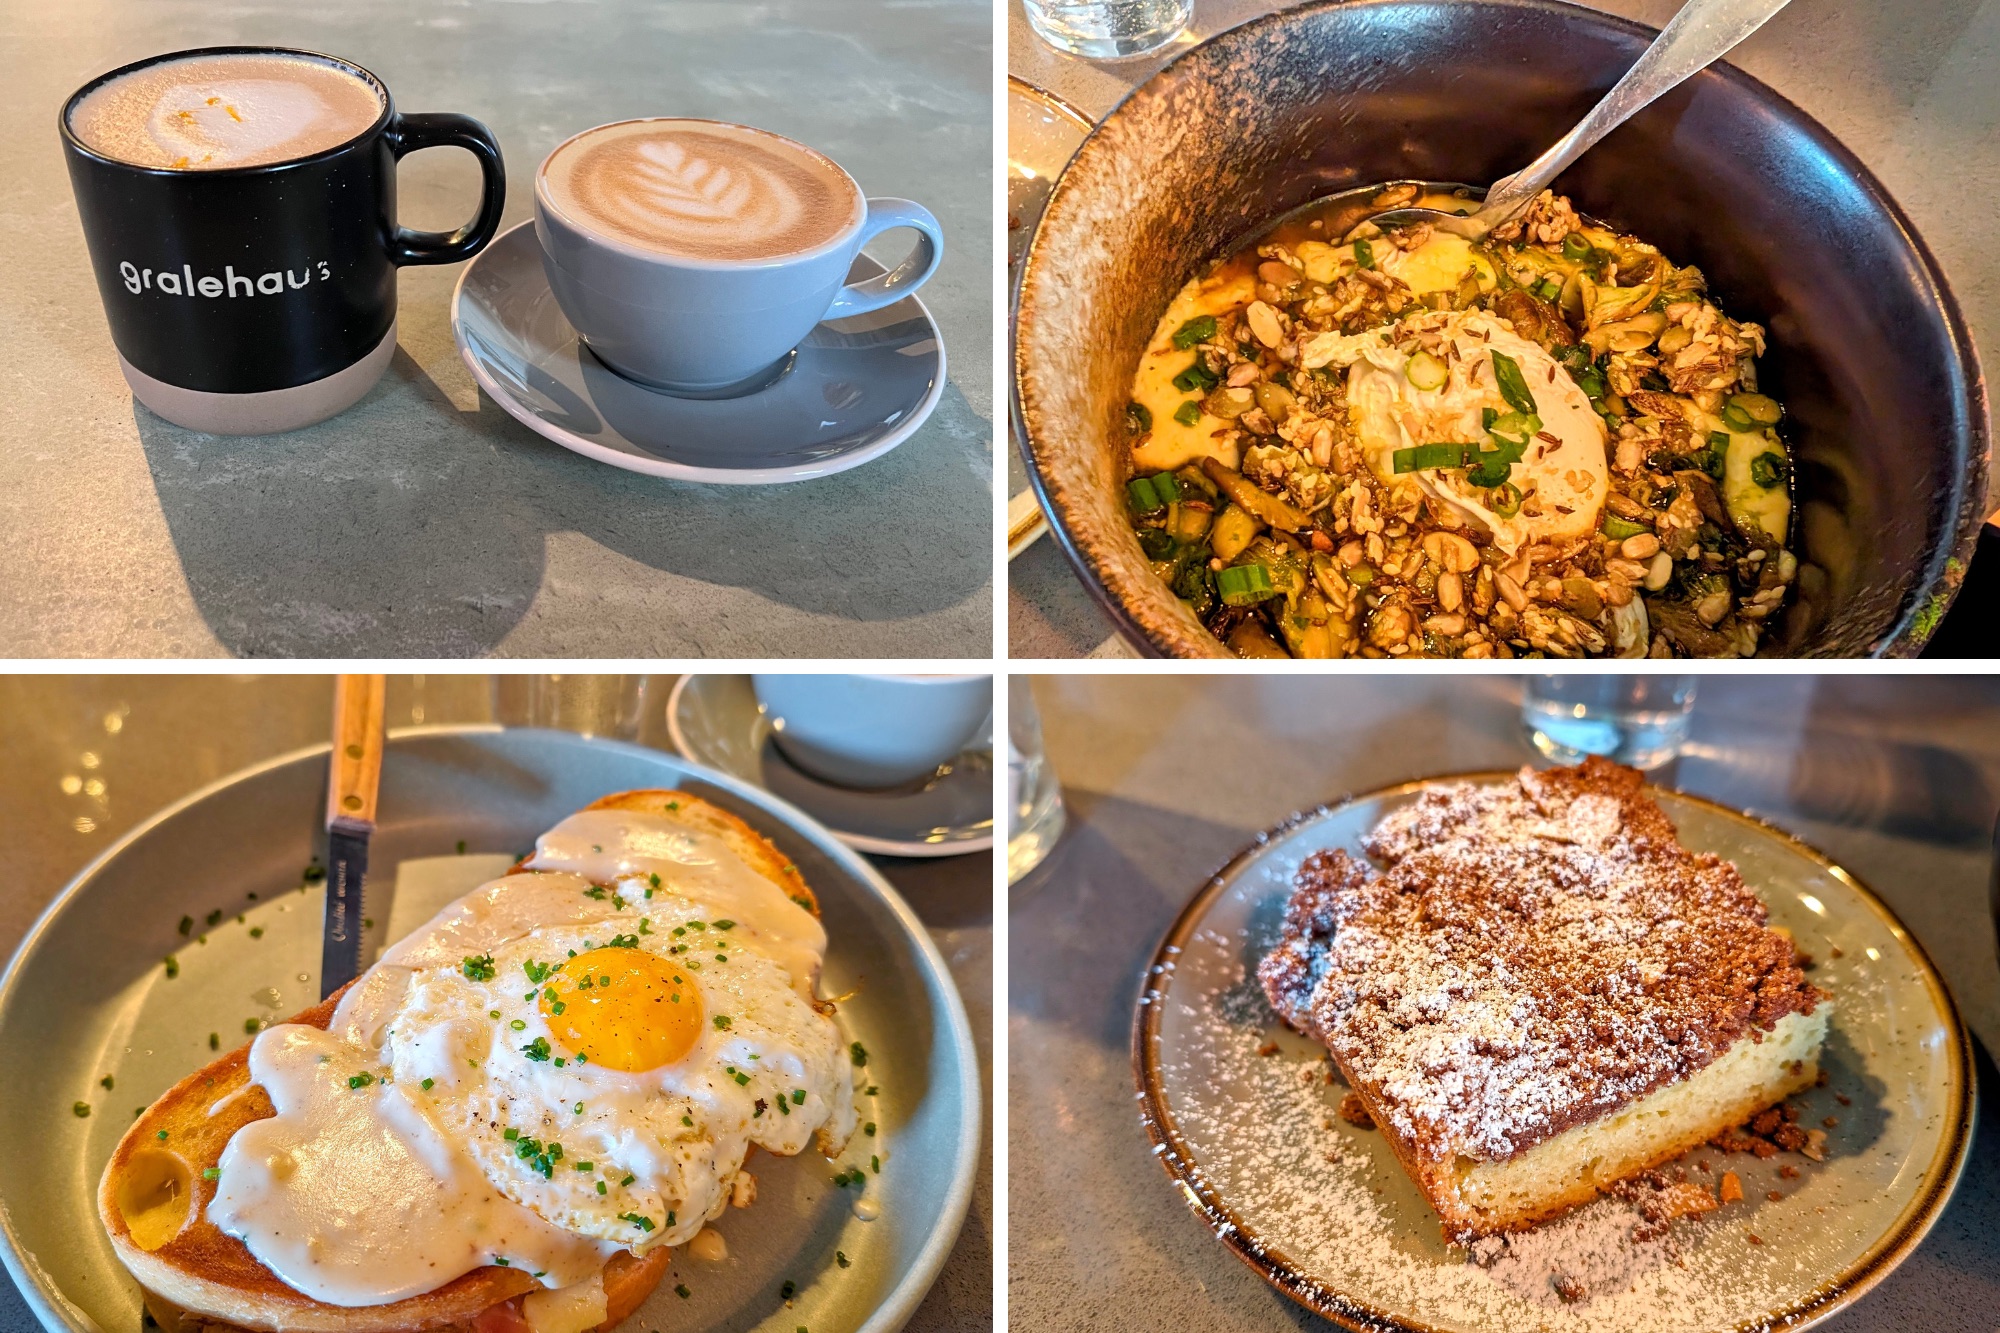 Four images from breakfast at Gralehaus